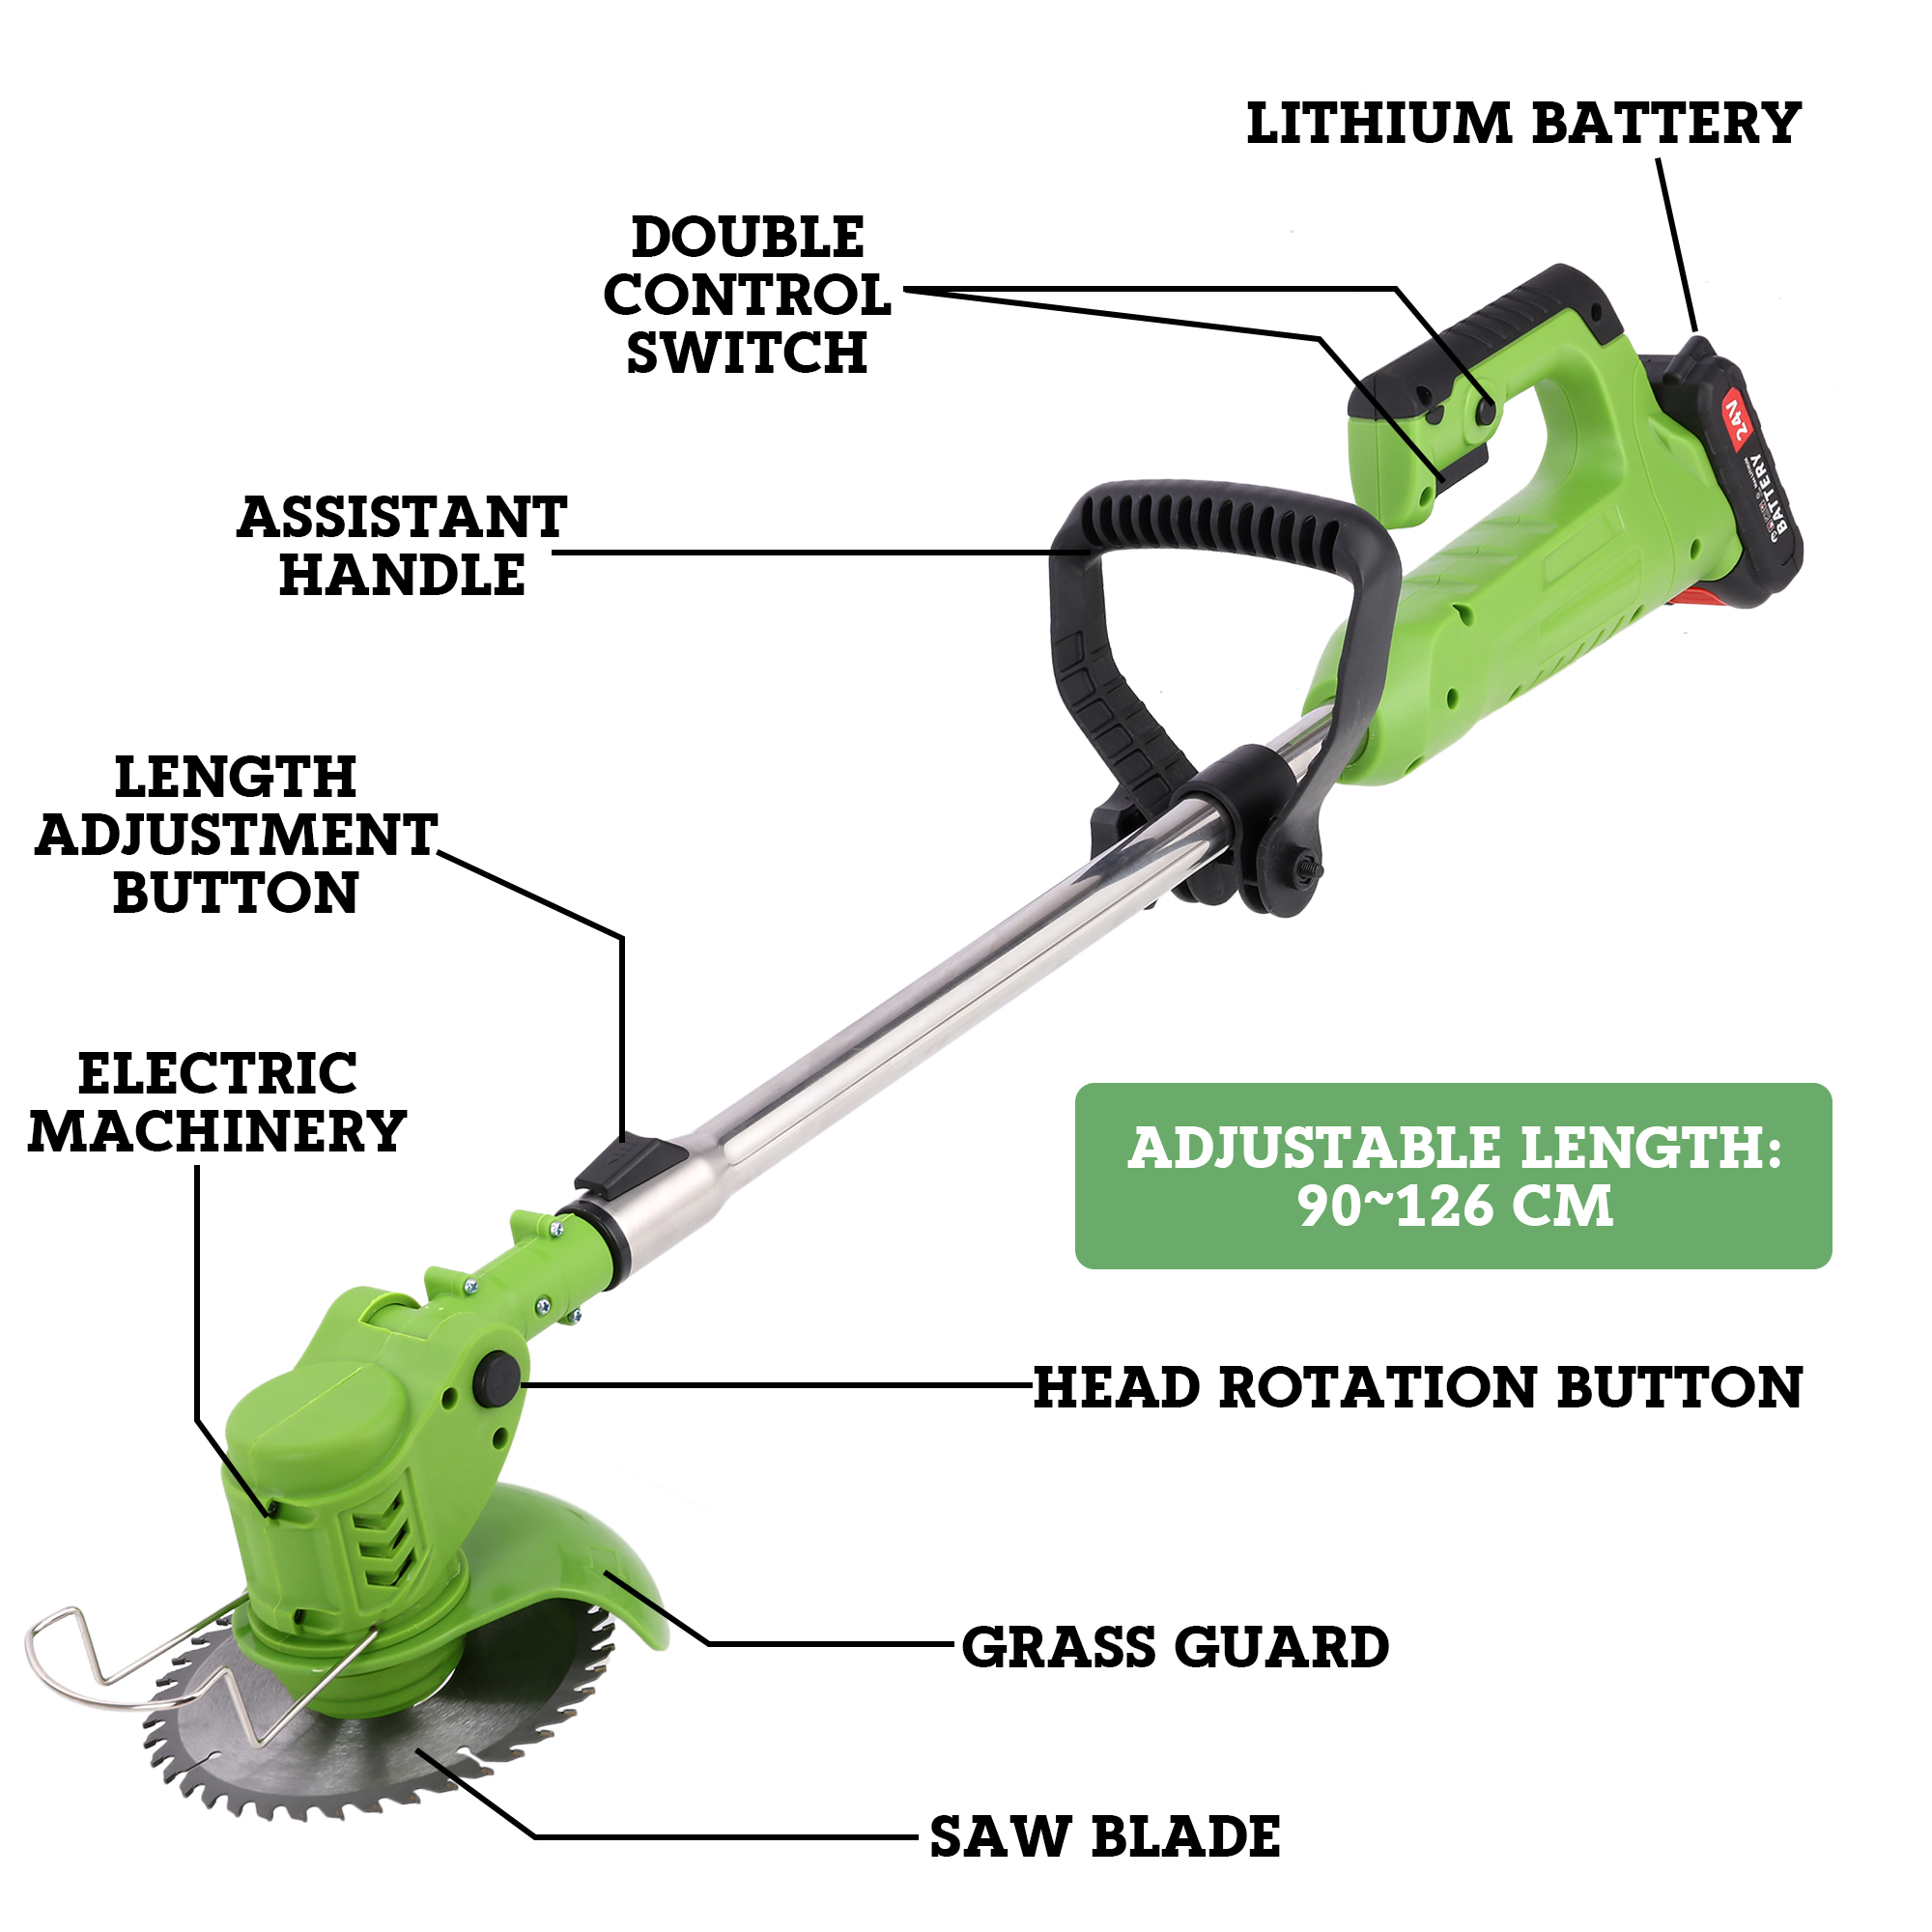 LELINTA 24V Cordless String Trimmer/Edger, Battery Powered Weed Eater Cordless- Electric Weed Wacker Rechargeable Trimmer Edger Lawn Tool,Green 2 Battery & 1 Charger - image 2 of 8